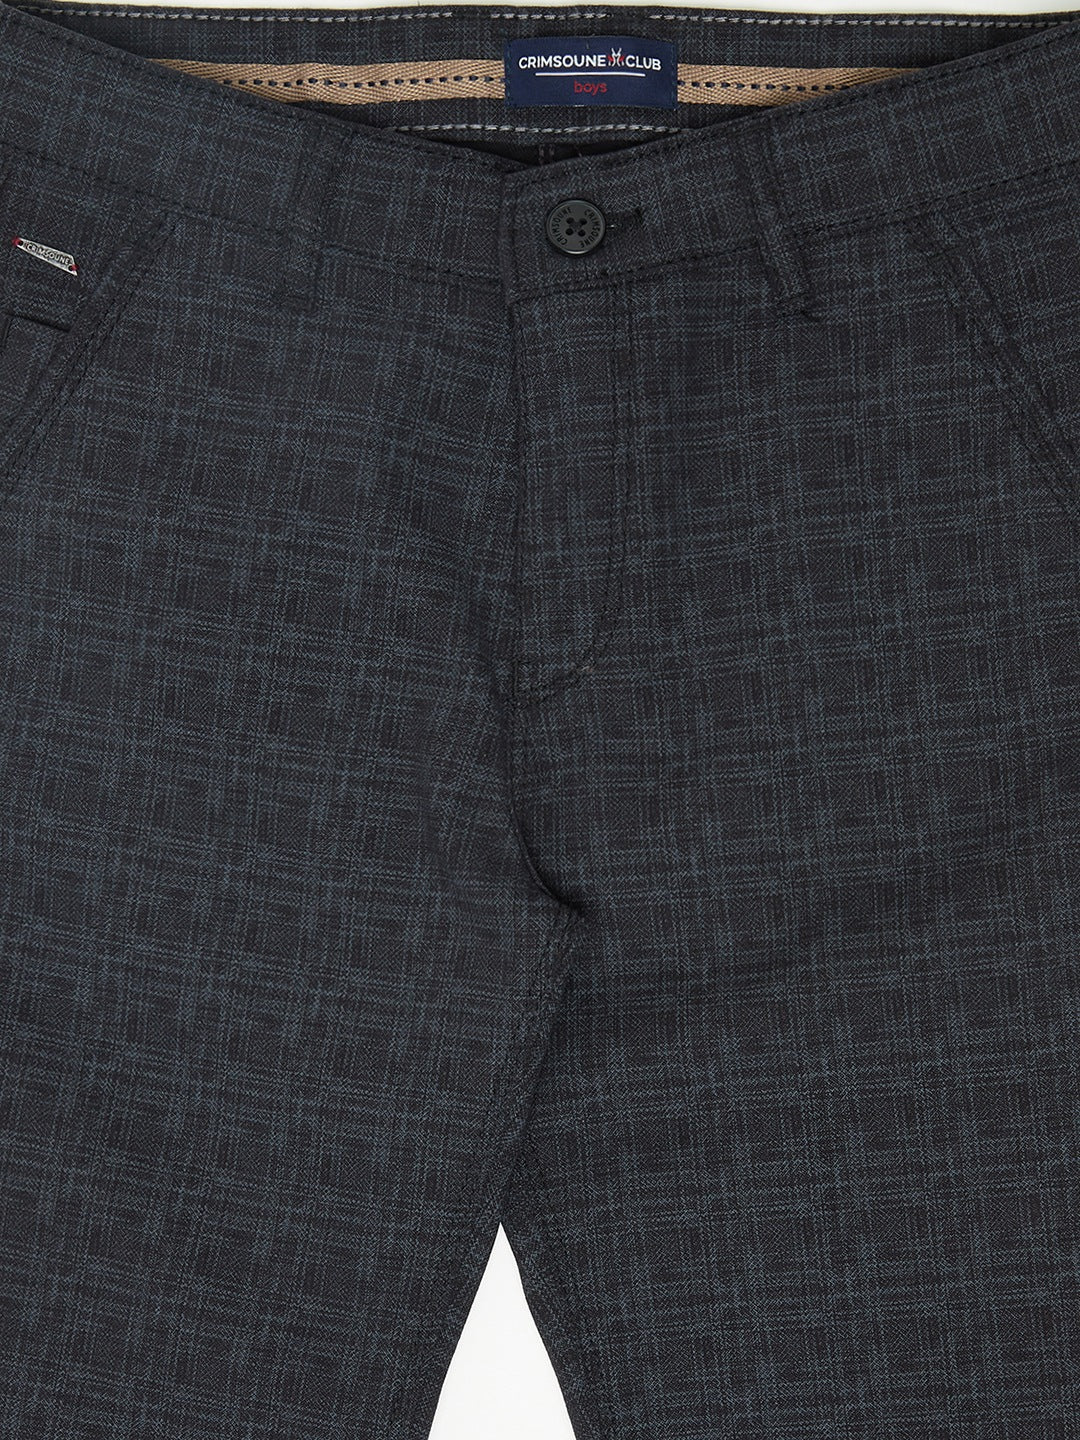 Black Checked Trousers - Boys Trousers